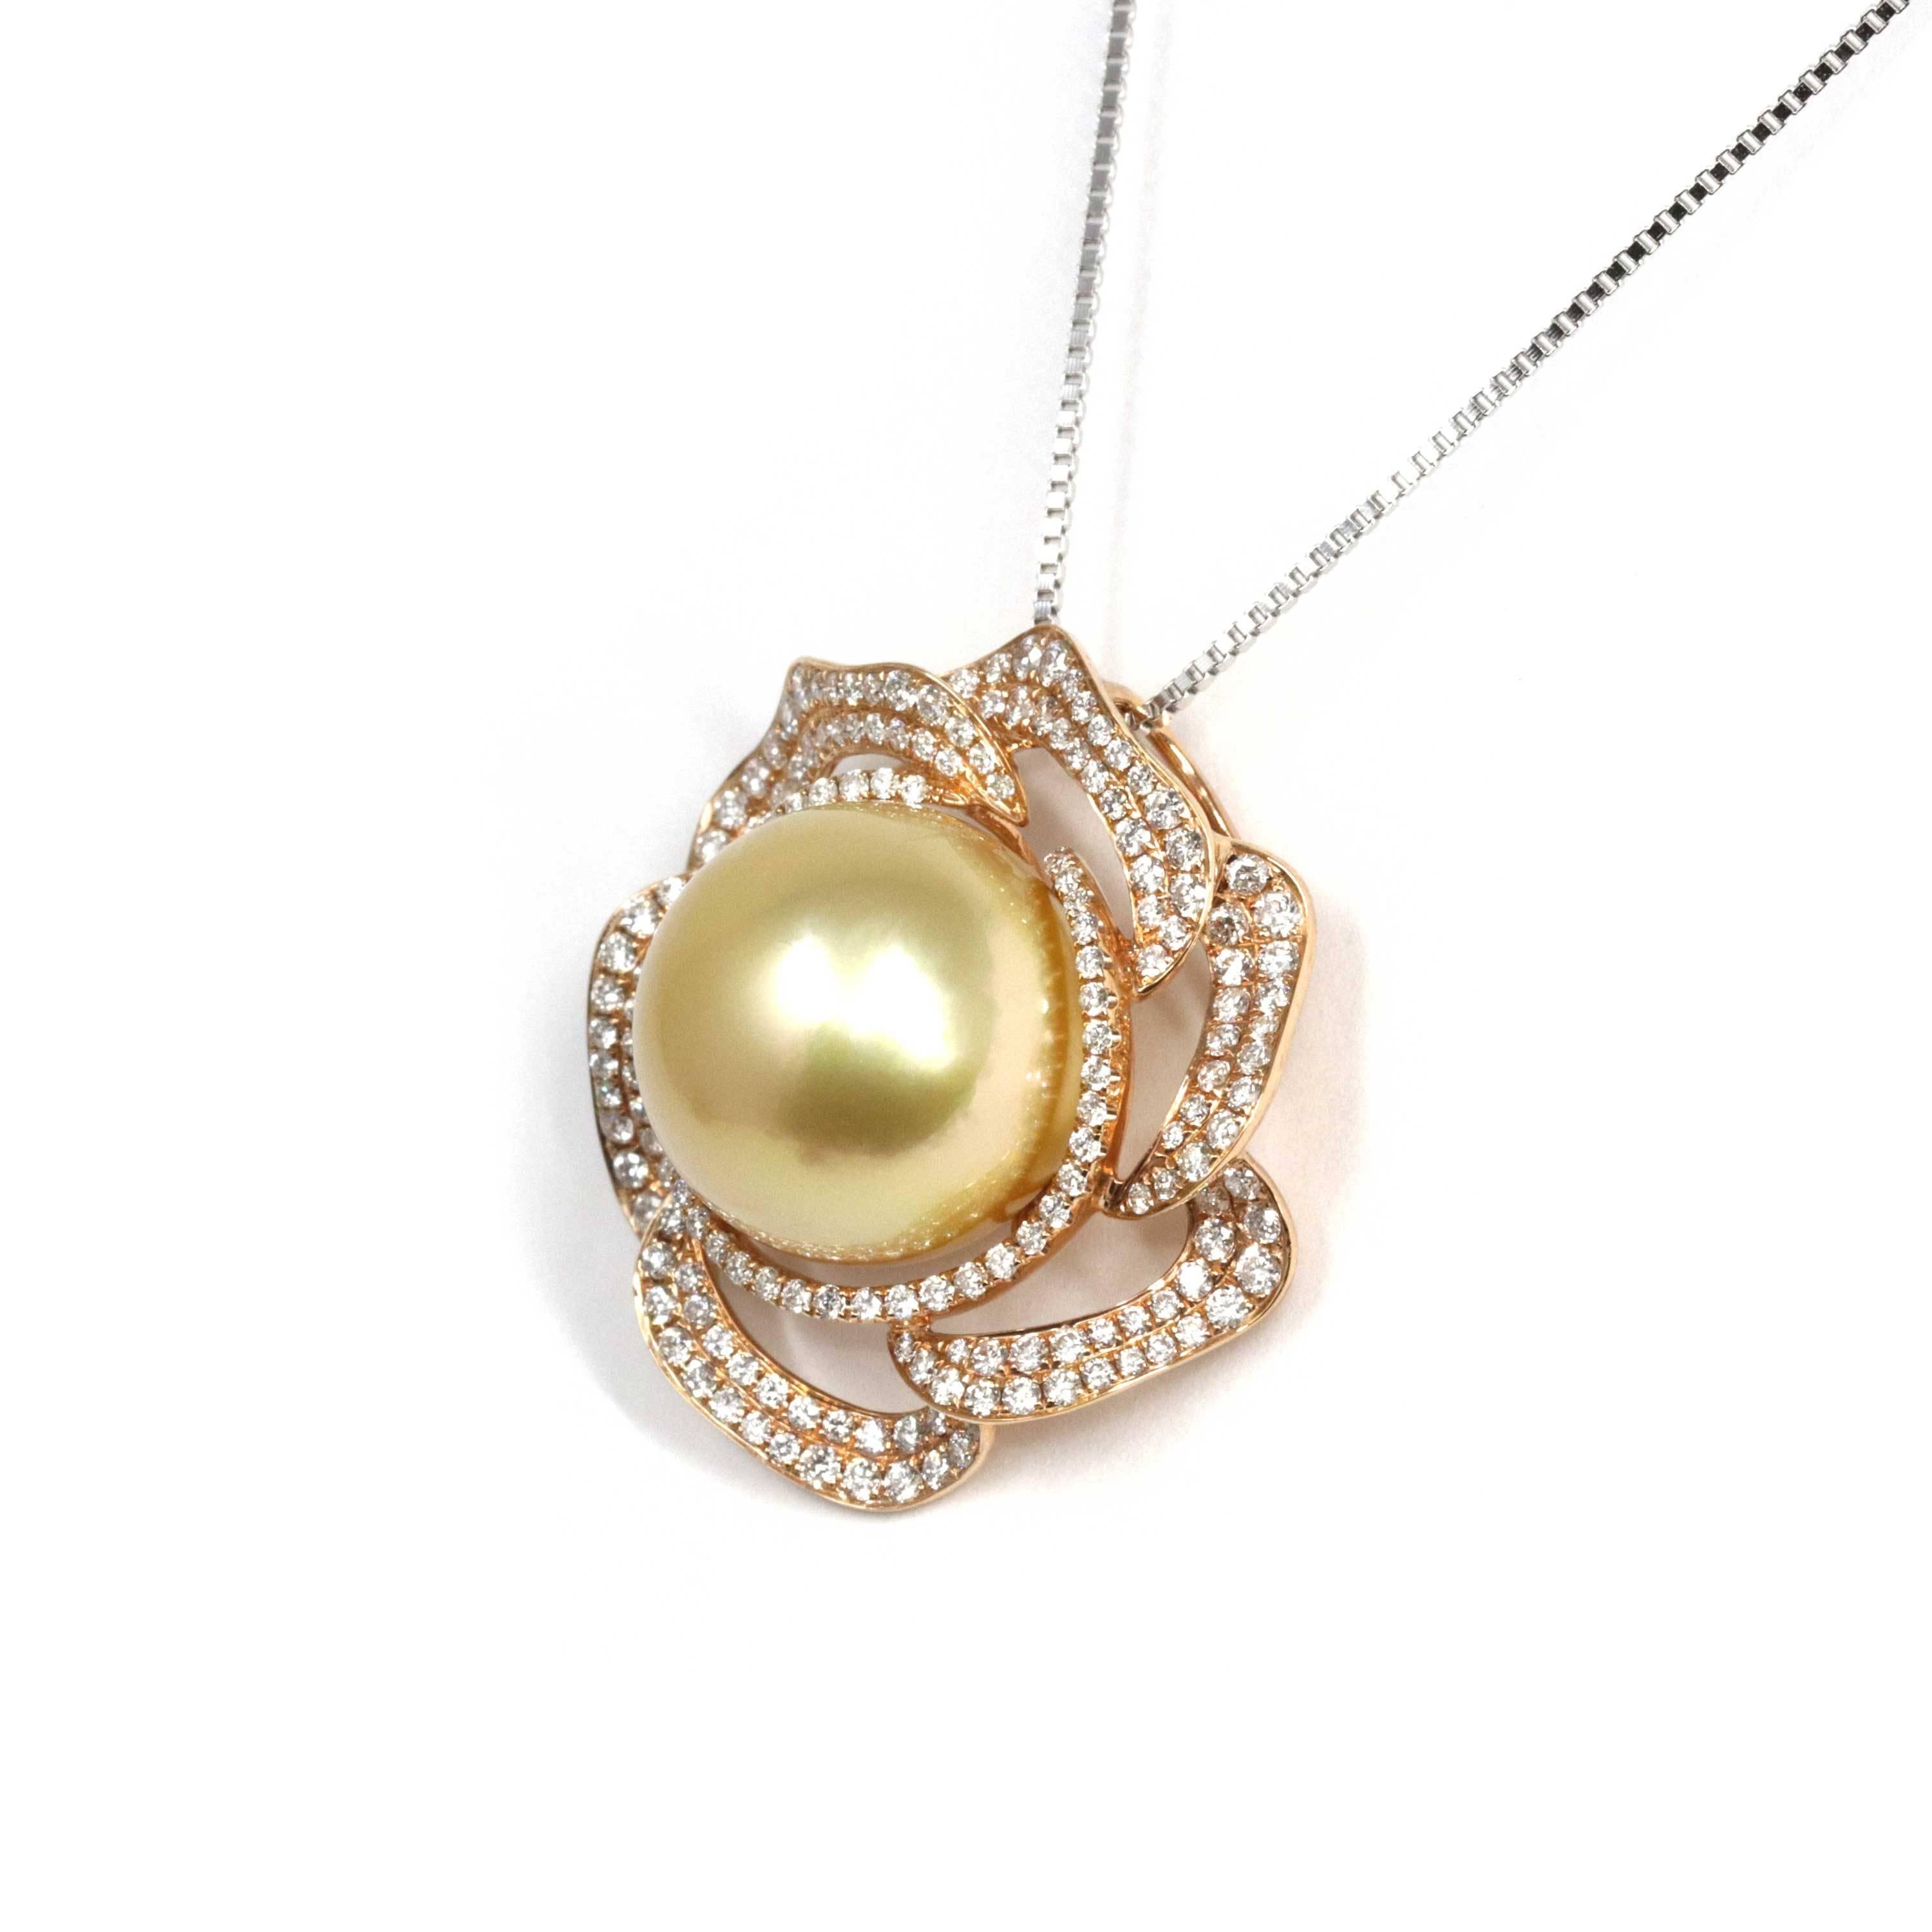 * INTRODUCTION--- Lustrous 15 mm diameter round black Tahitian South Sea cultured pearl. Can be worn on any occasion, whether formal evening event or everyday casual. Handpicked, real pearls with thick and iridescent nacre. This pendant is comprised